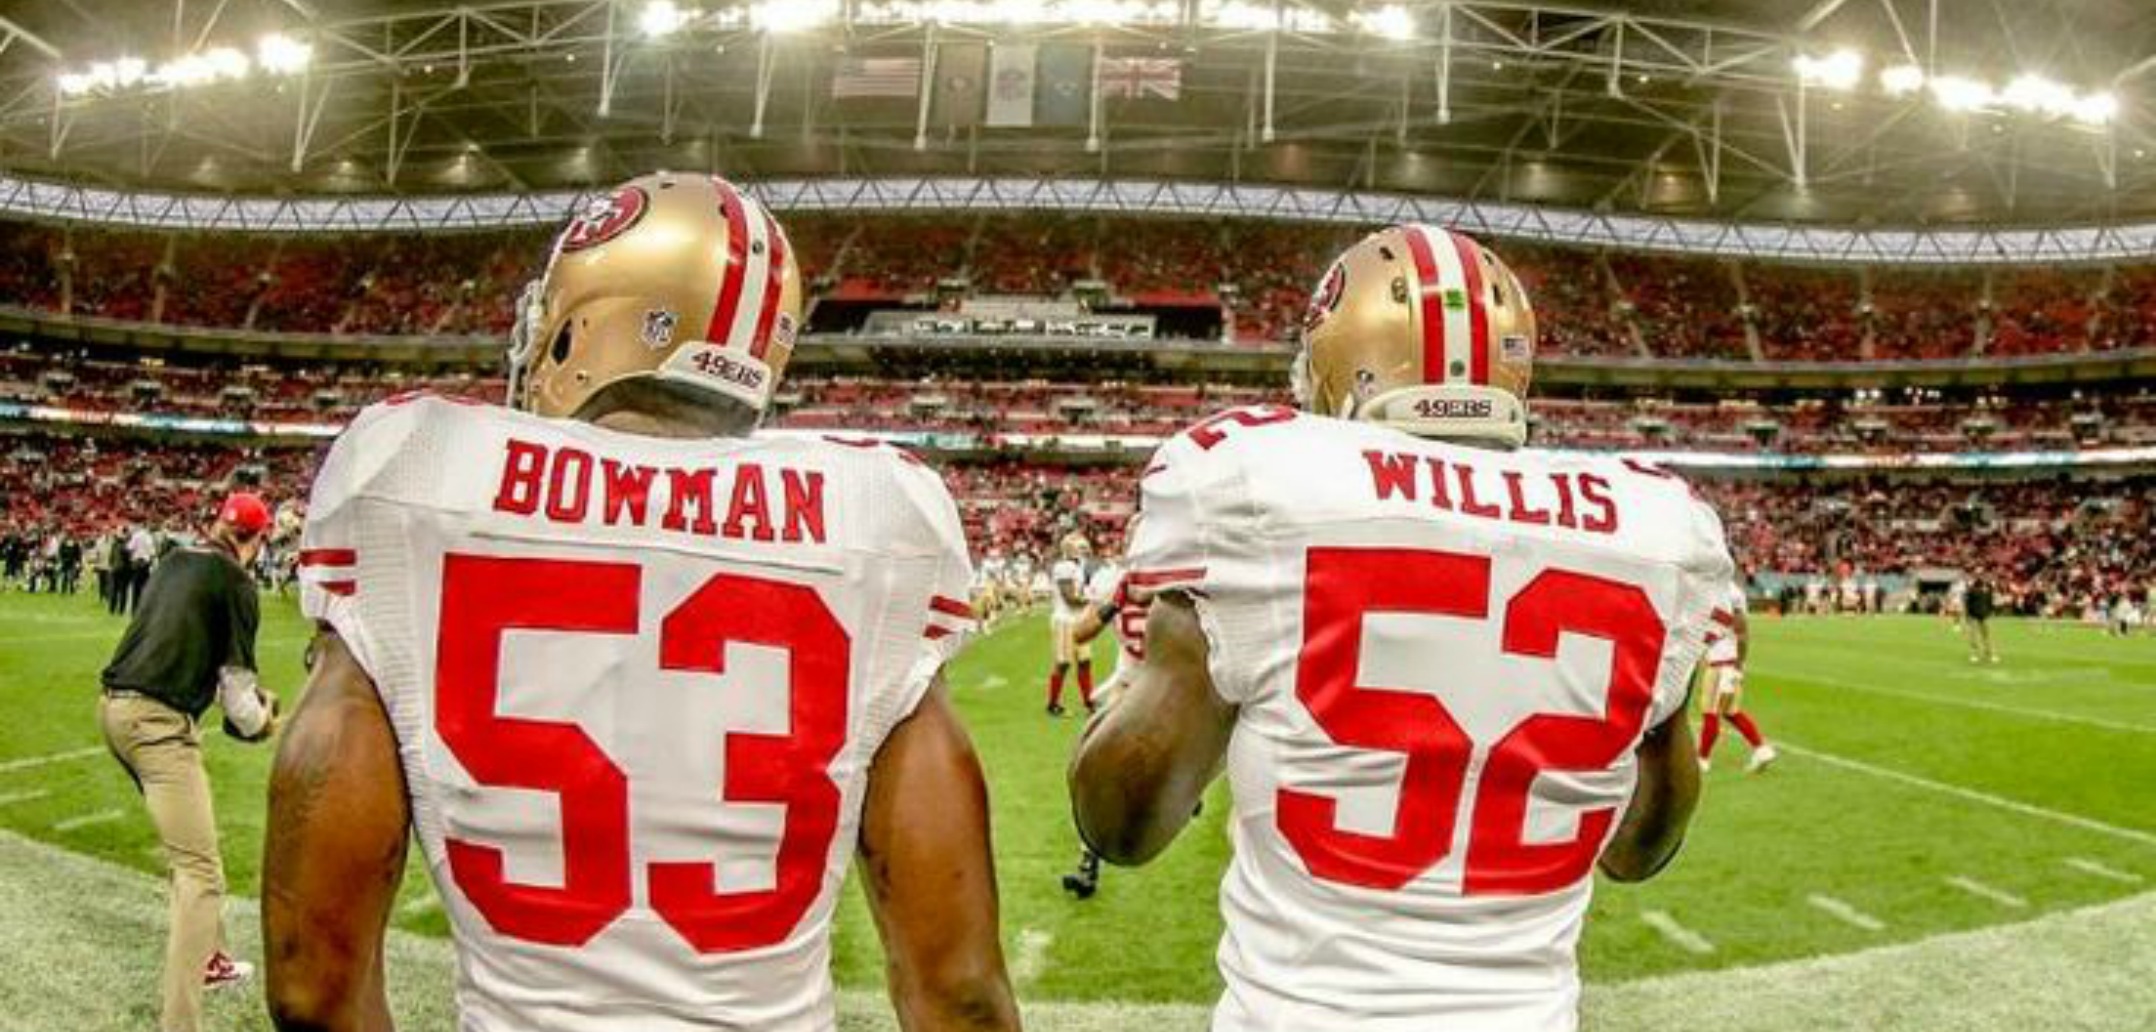 Courtesy of SF Examiner: Without Bowman and Willis, can the 49ers expect this defense to continue dominating? 